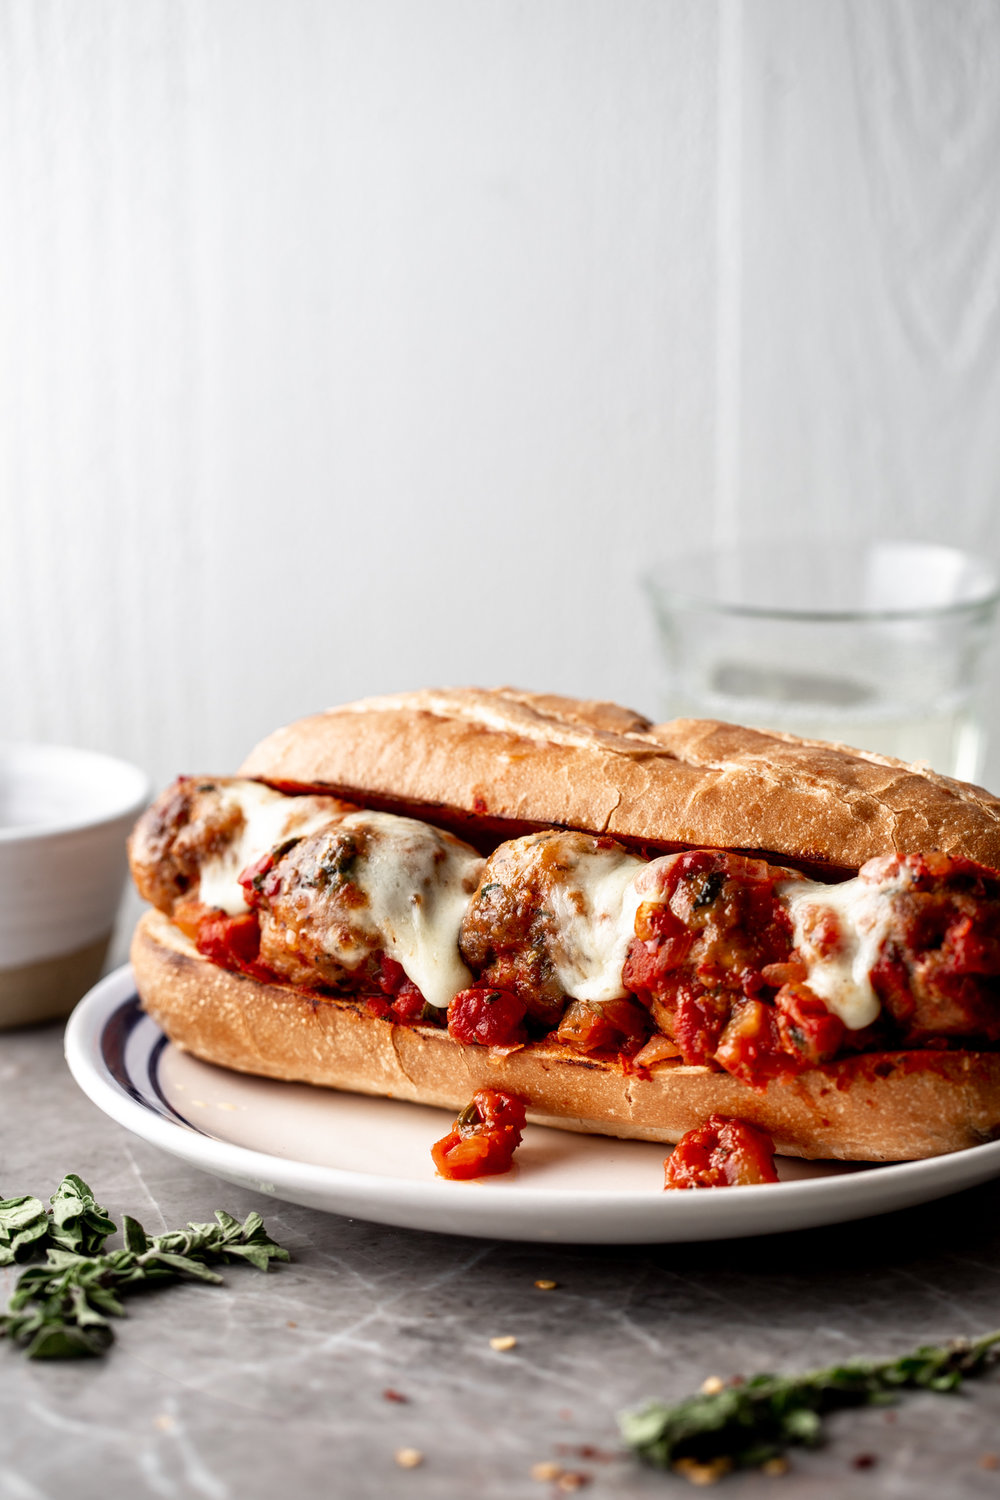 Meatball Subs with Spicy Beef and Pork Meatballs with melted mozzarella and provolone cheese